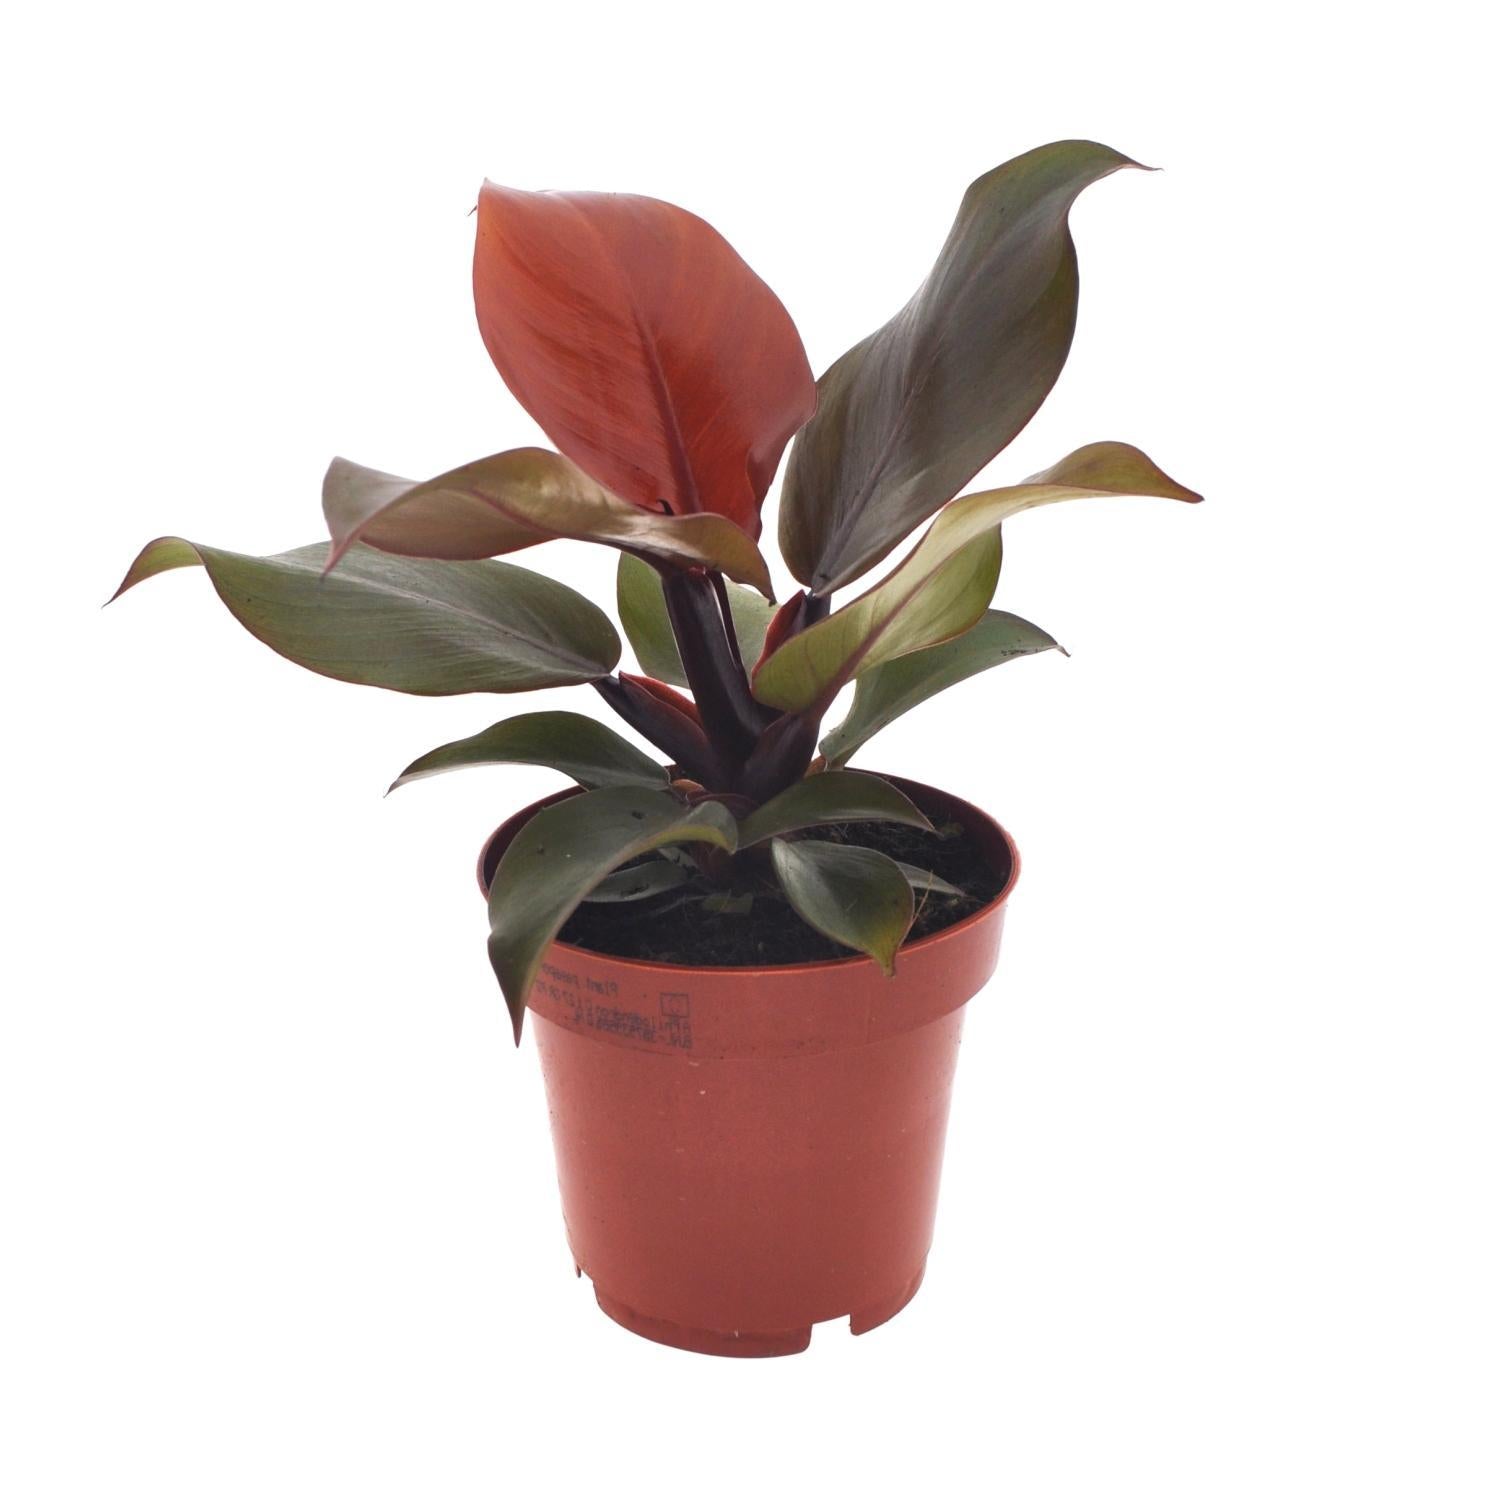 Everspring Philodendron imperial red - ø12cm - ↑↓f25cm philodendron imperial red - ø12cm - ↑↓f25cm